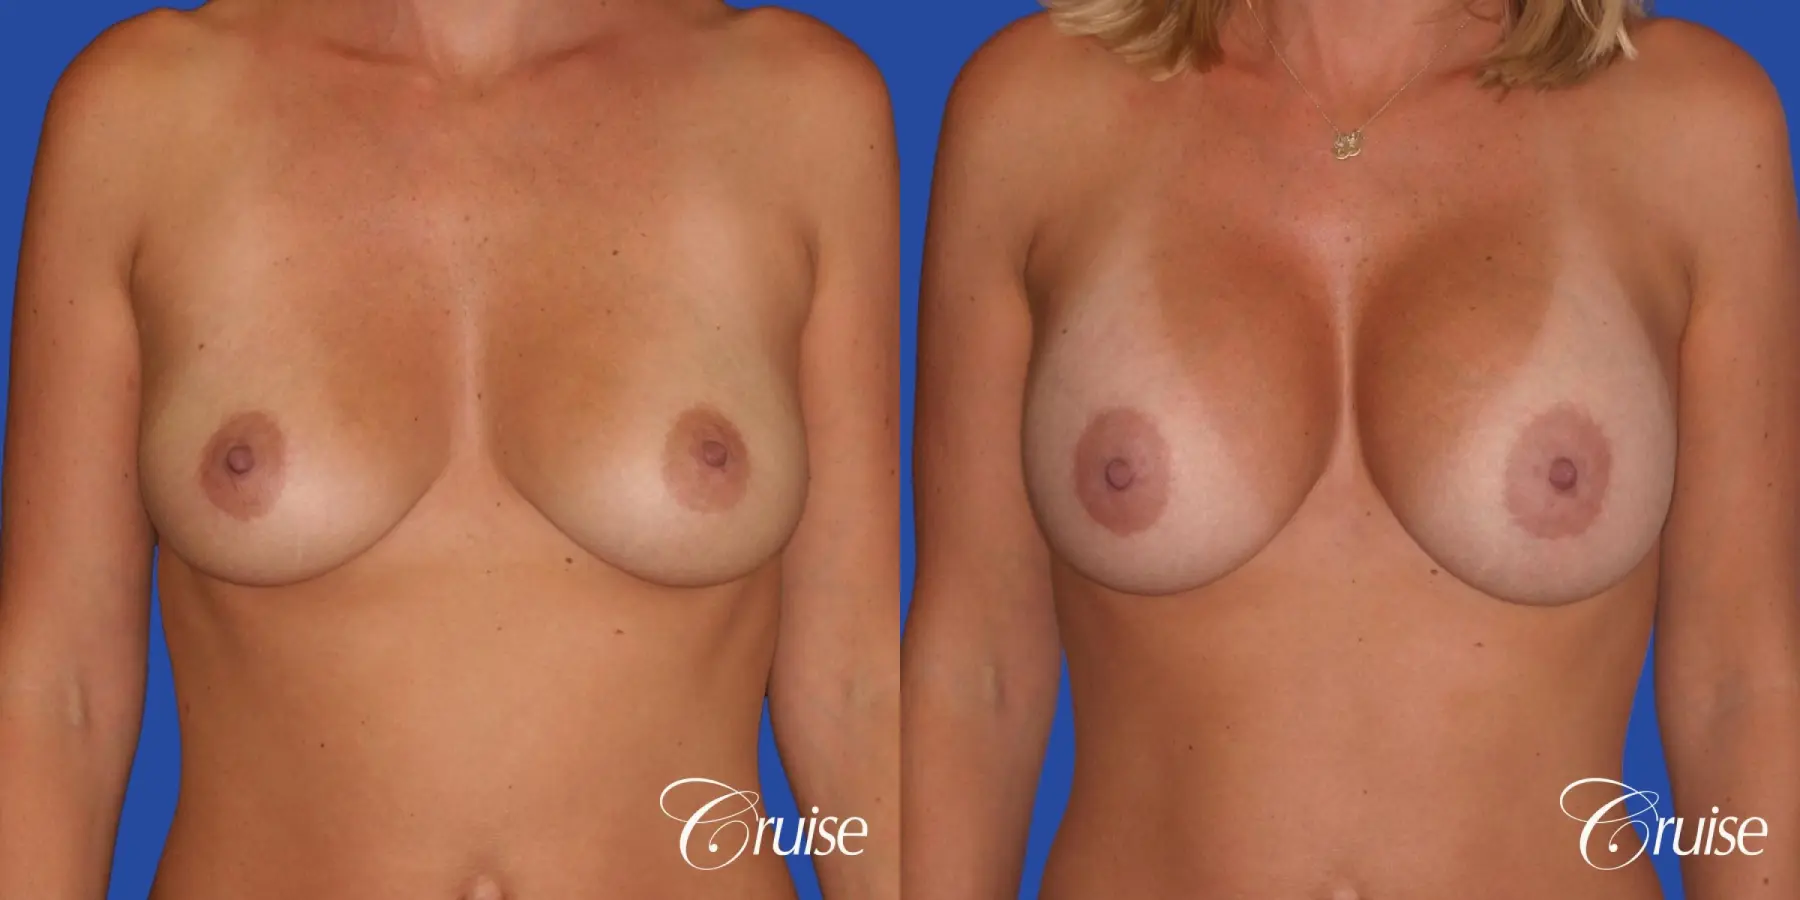 Breast Augmentation - Before and After 1